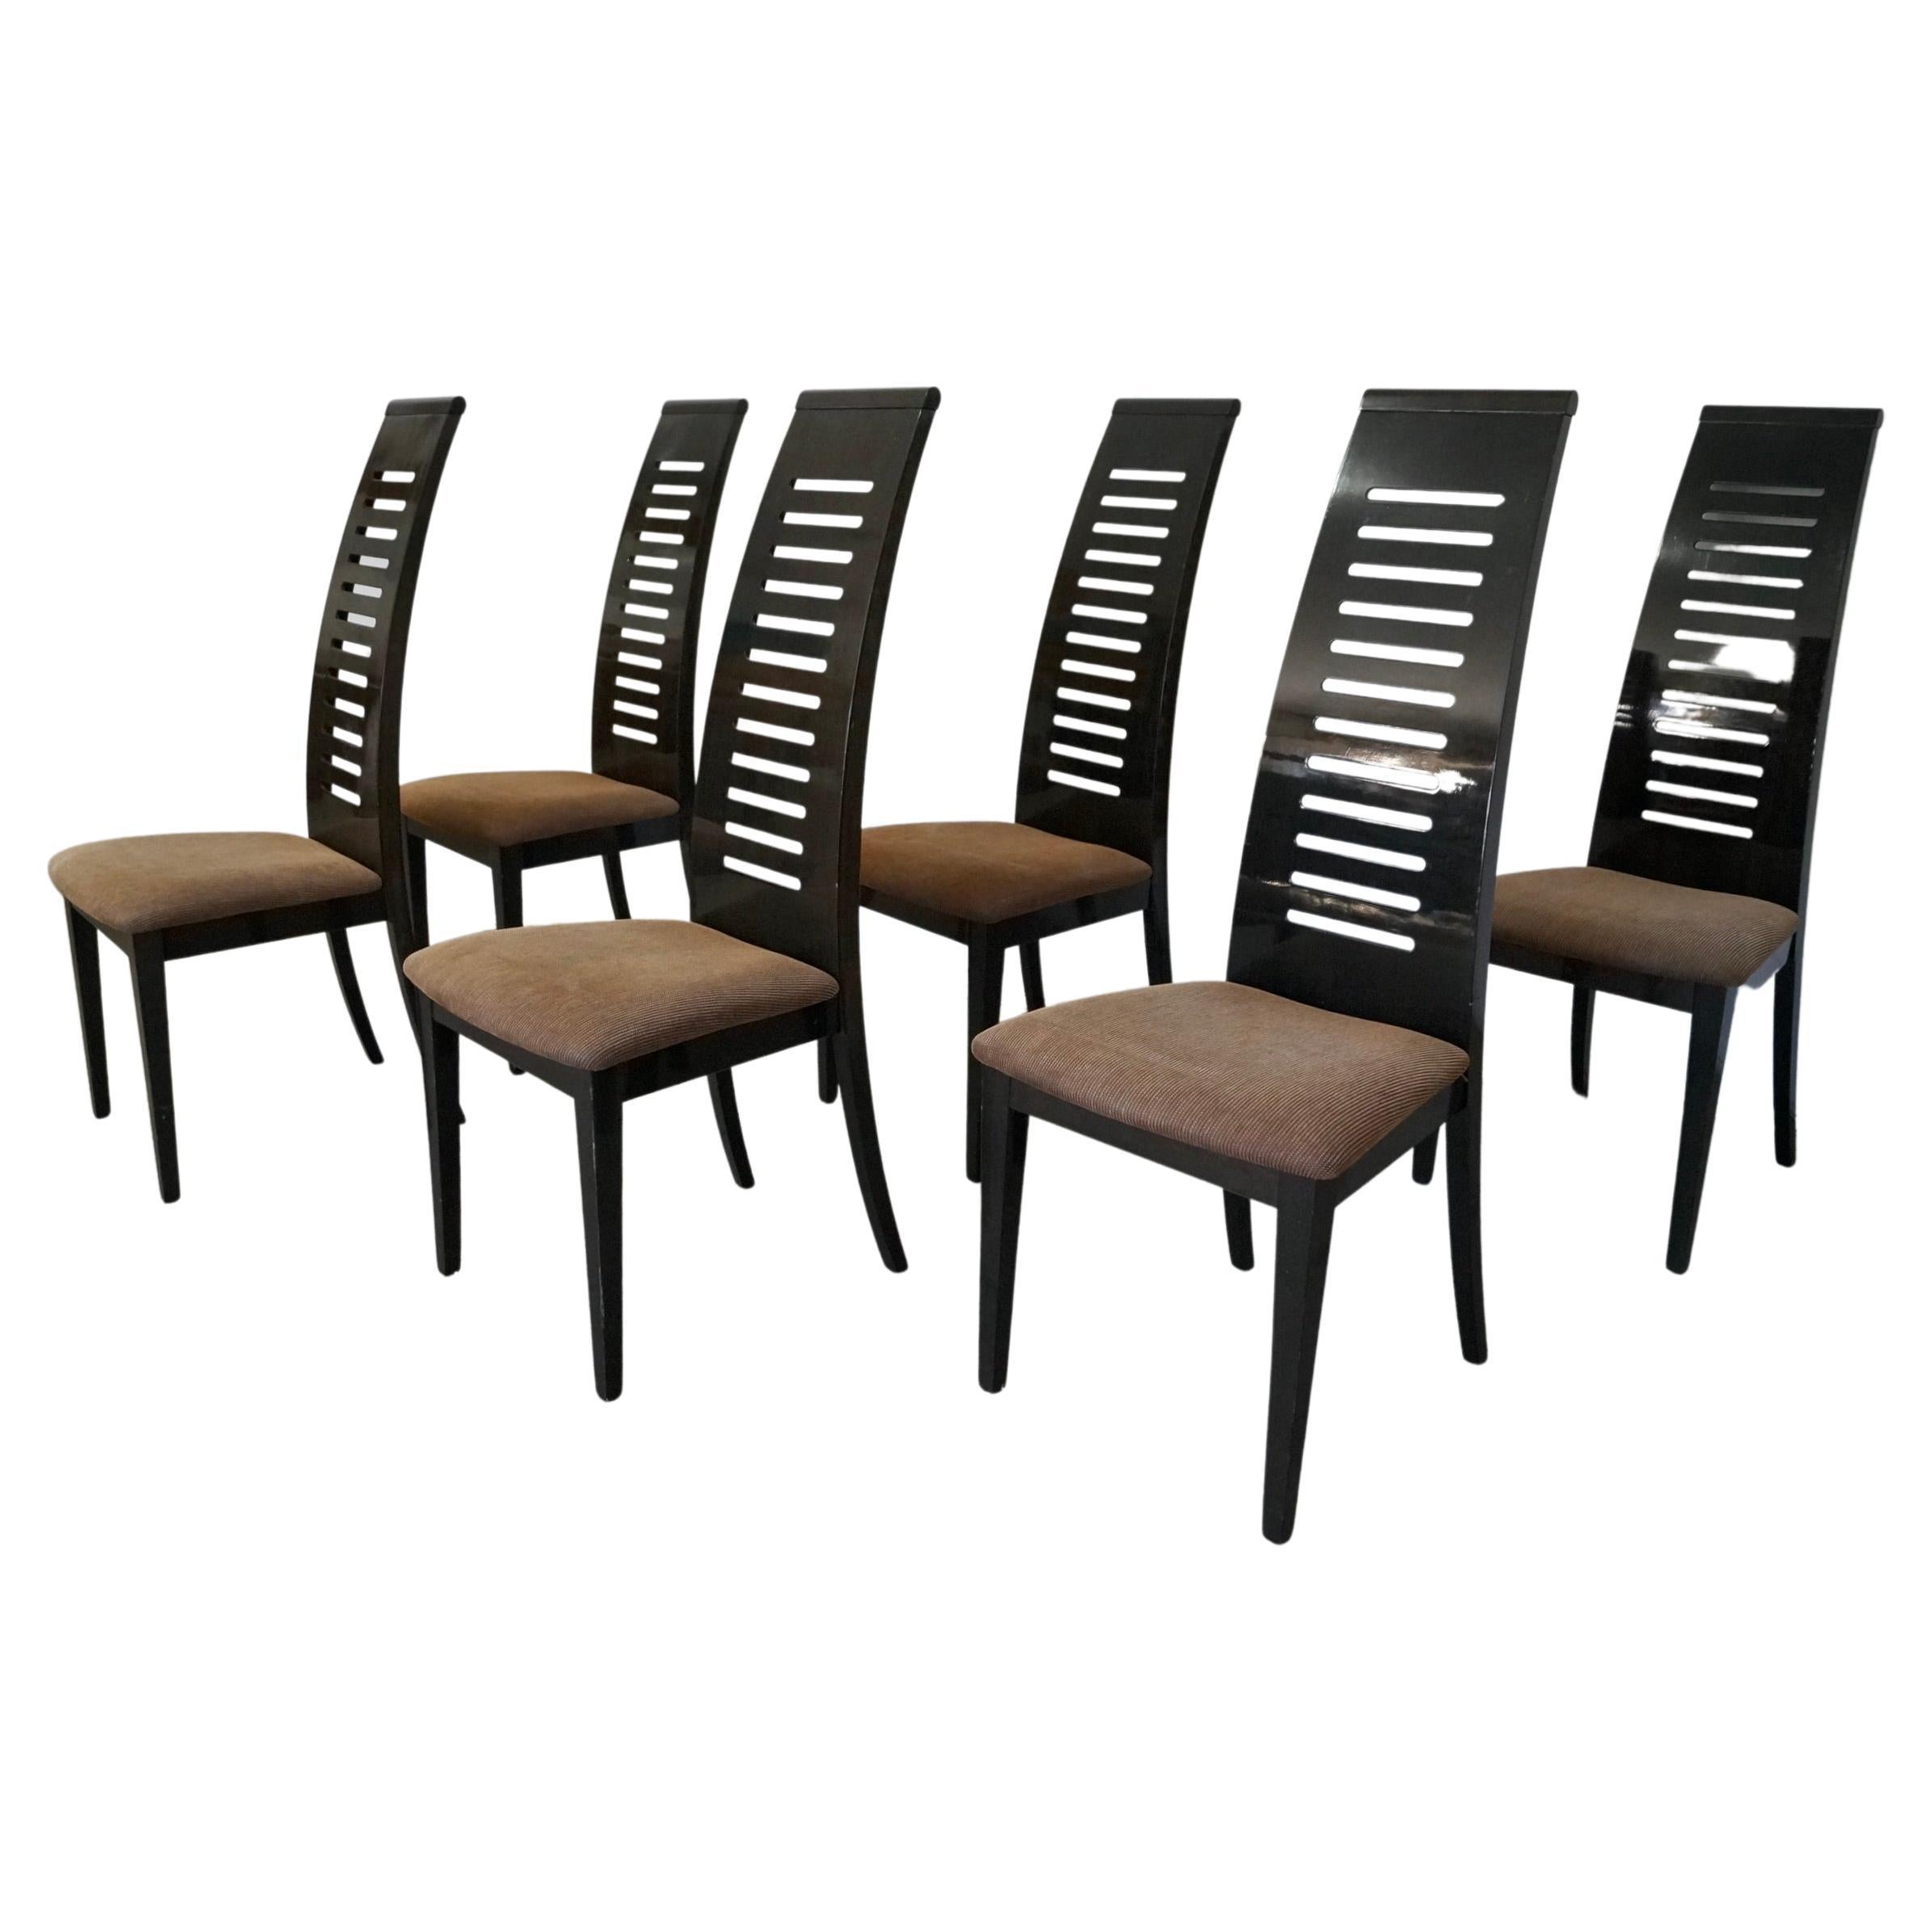 Postmodern Ello Furniture Pietro Costantini Dining Chairs - Set of 6 For Sale